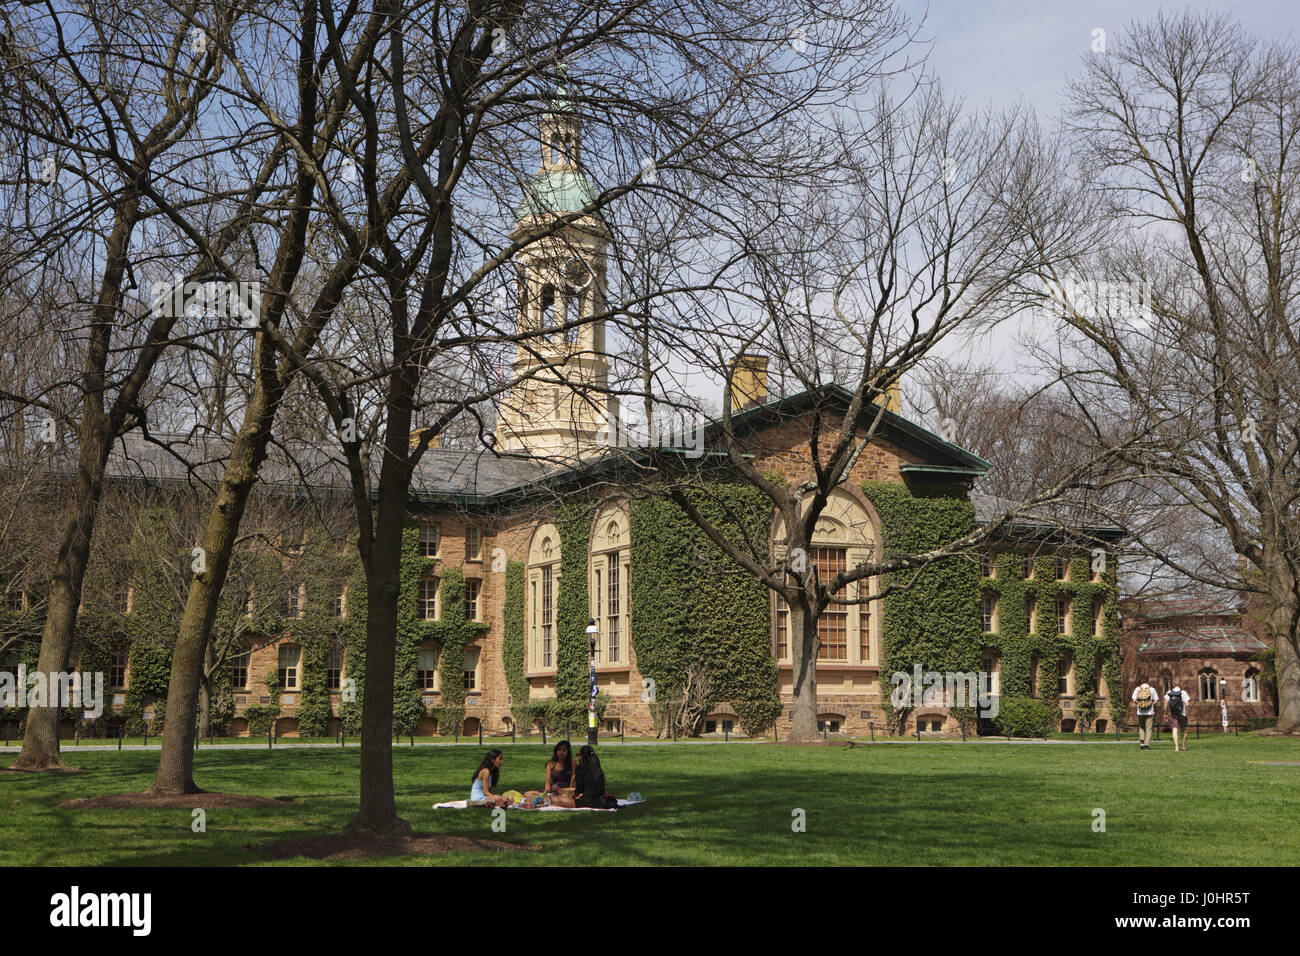 Princeton, NJ, USA - April 11, 2017: Princeton University Campus in spring. Nassau Hall and Cannon Green. Students sitting on the lawn on a sunny day. Stock Photo